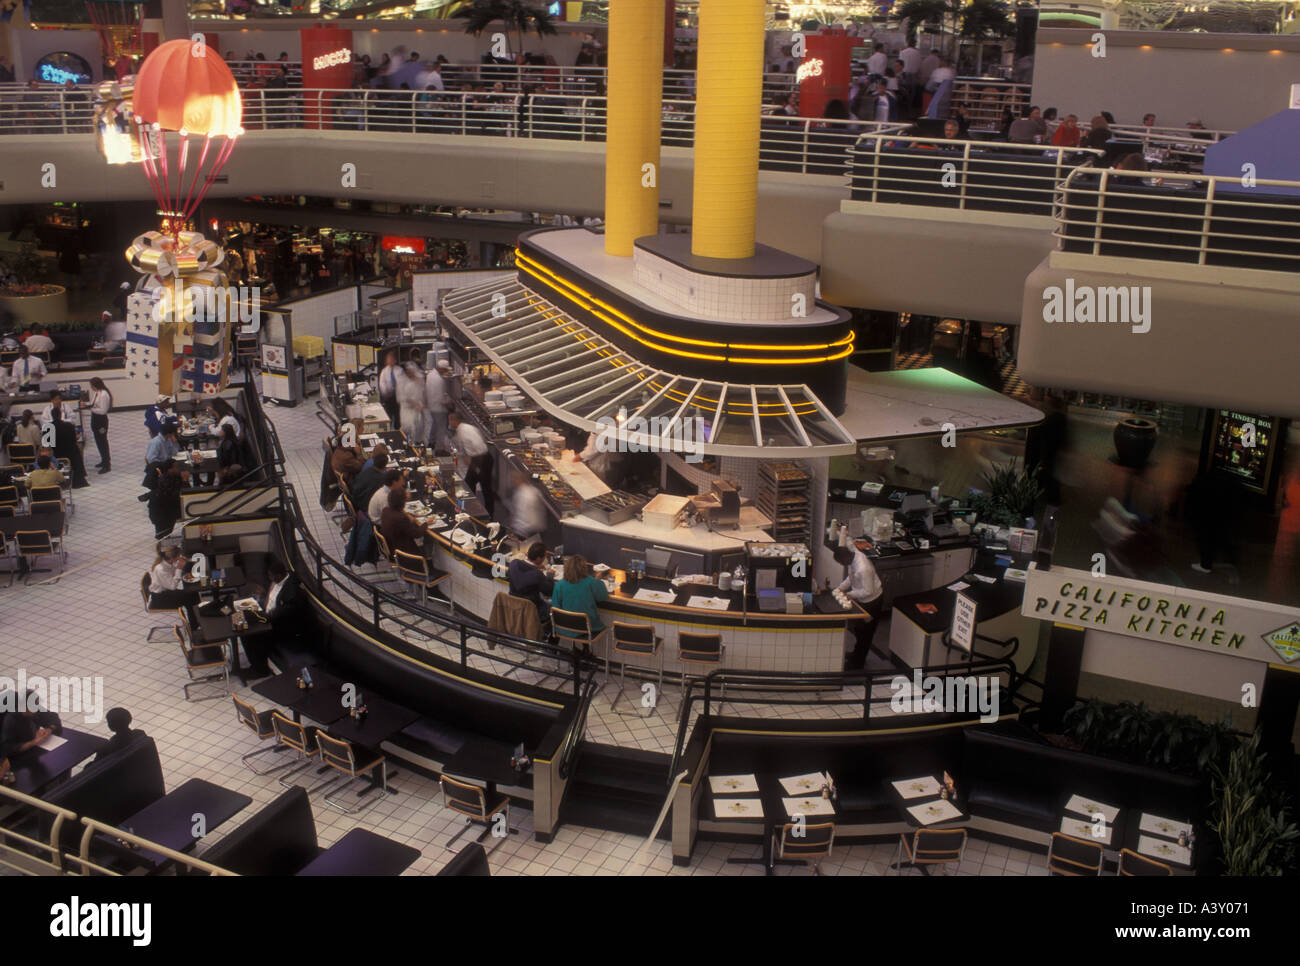 18 Photos Stitched Together - Food Court at Lenox Mall in …